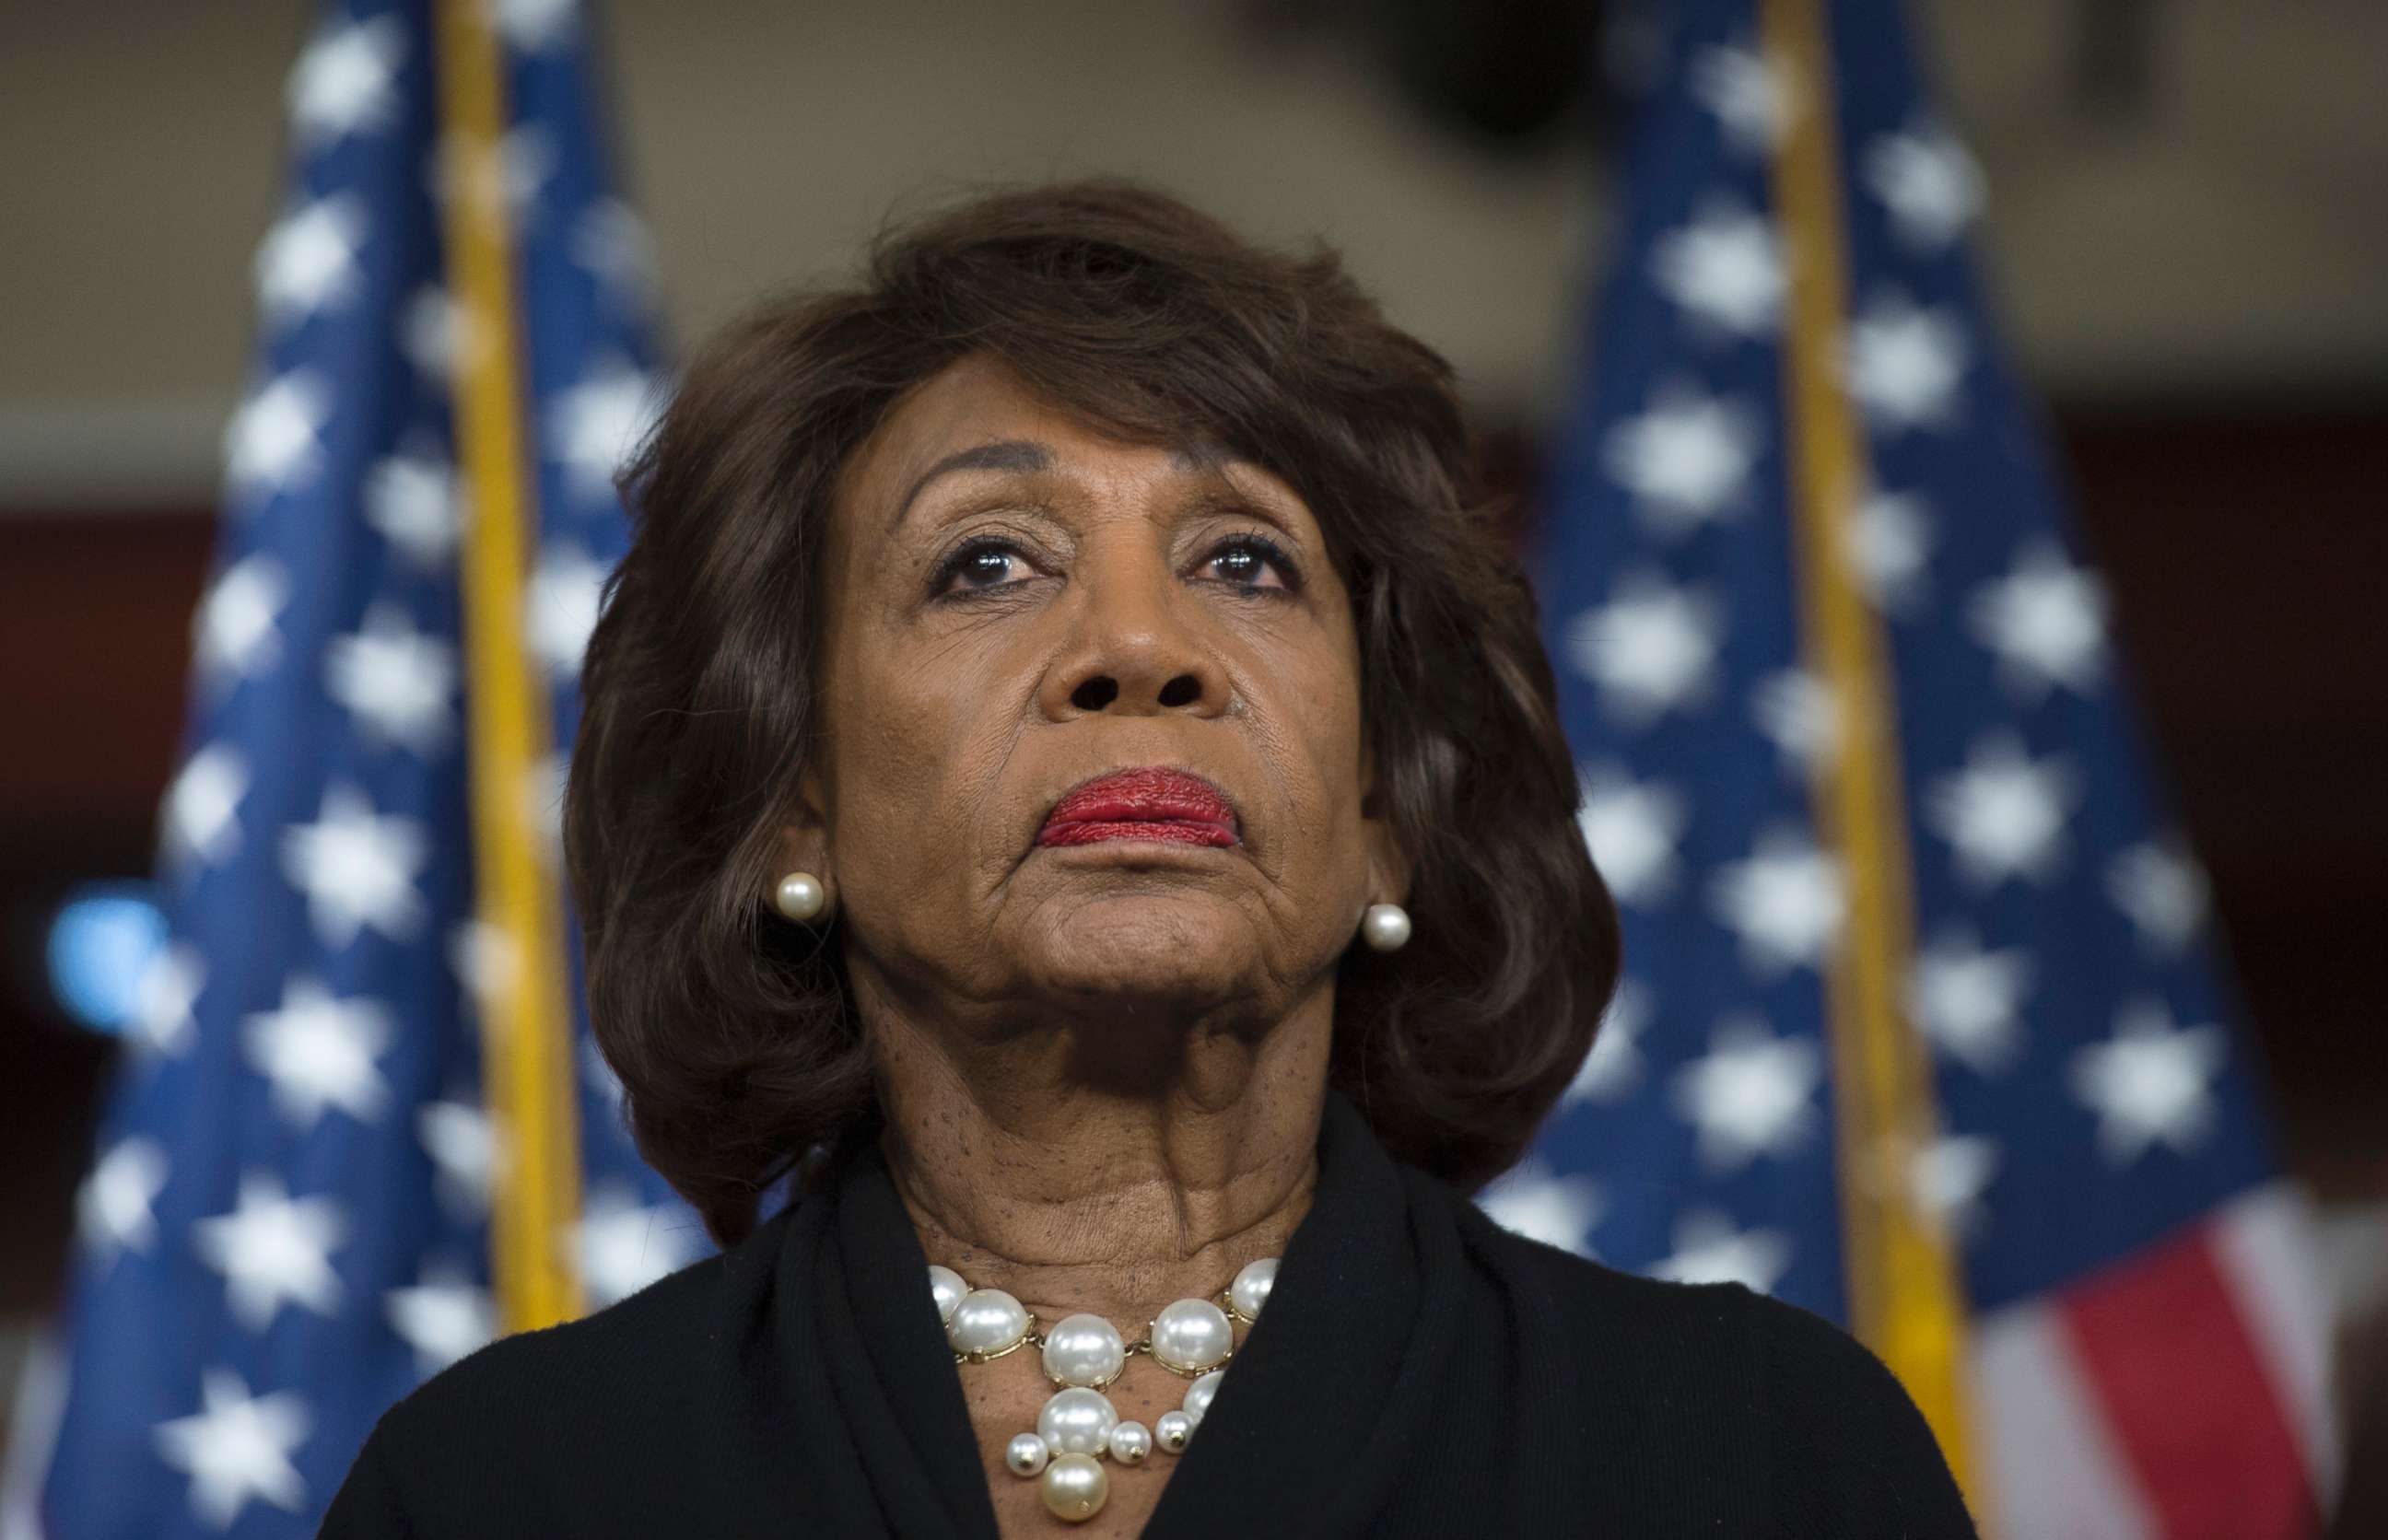 PHOTO: Representative Maxine Waters looks on before speaking to reports regarding the Russia investigation on Capitol Hill in Washington, Jan. 9, 2018.